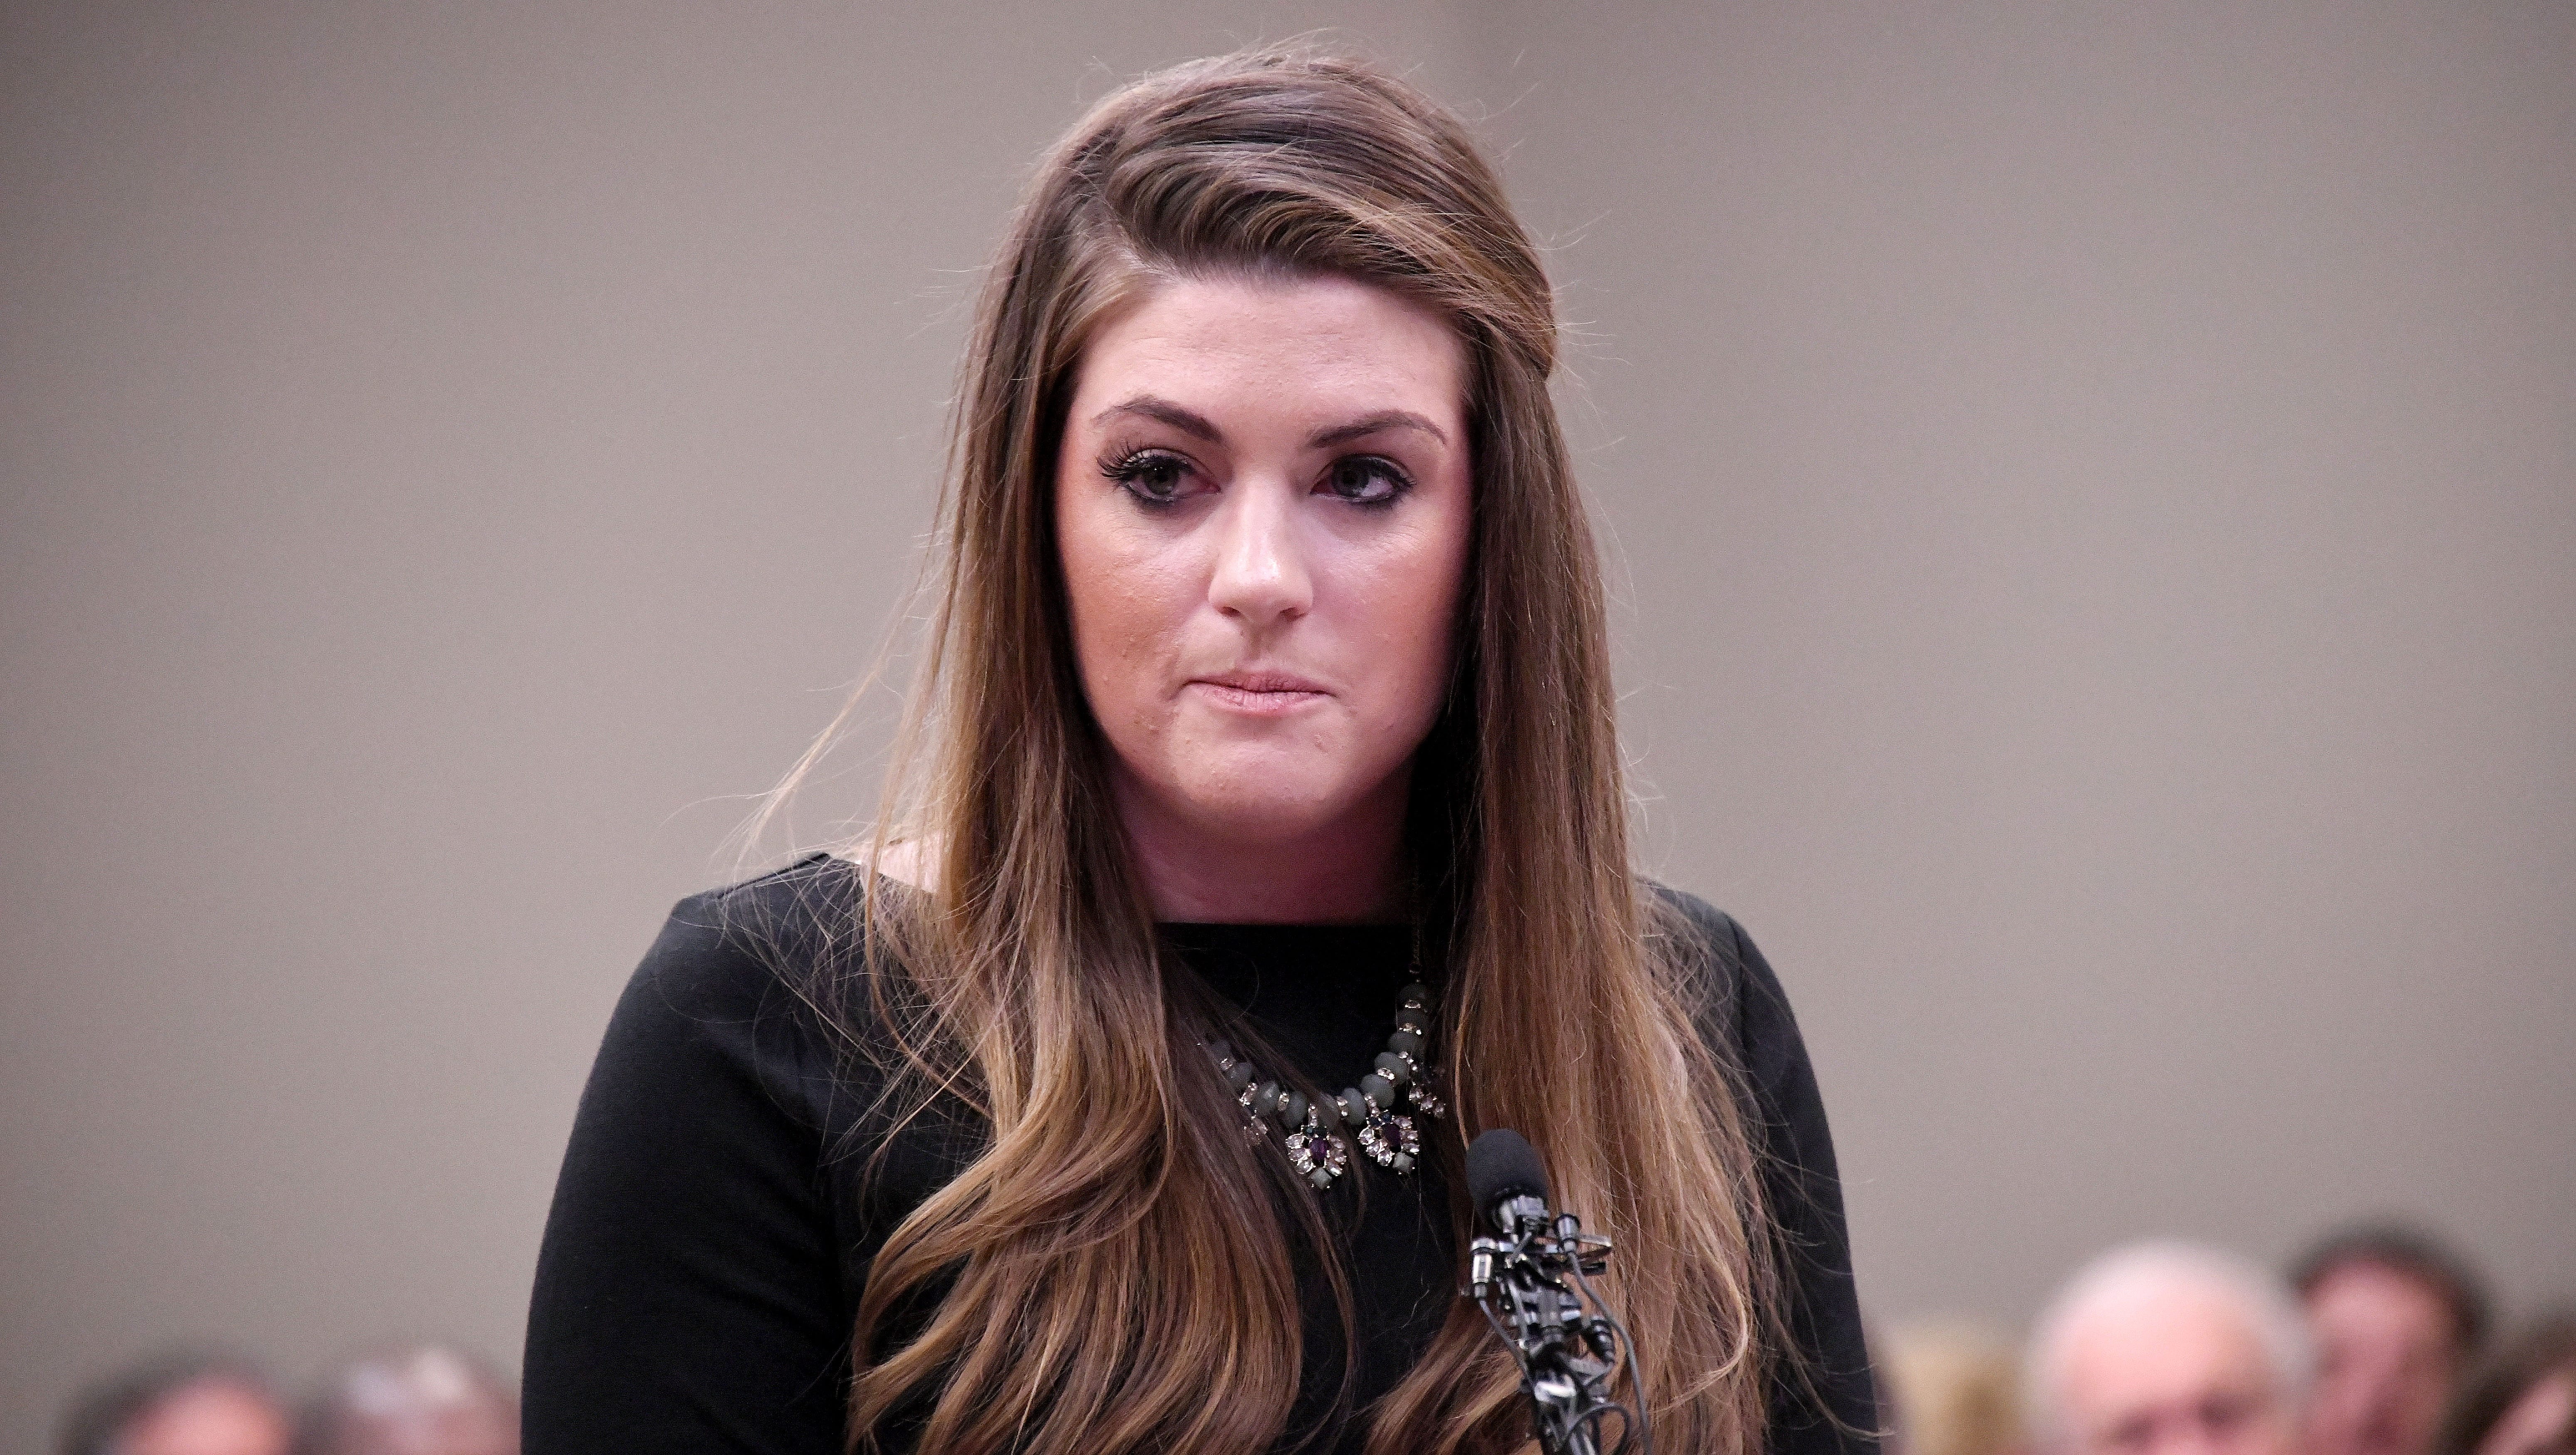 Sterling Riethman made the first victim statement on Day 7. She was 20 when she was abused by Nassar. "I look around this room, and I’m in complete awe," she said. "These women, these warriors, give me life. They lit a fire inside me that I didn’t even know existed ... They inspire me and fuel me to continue on in this fight against predators and their enablers."